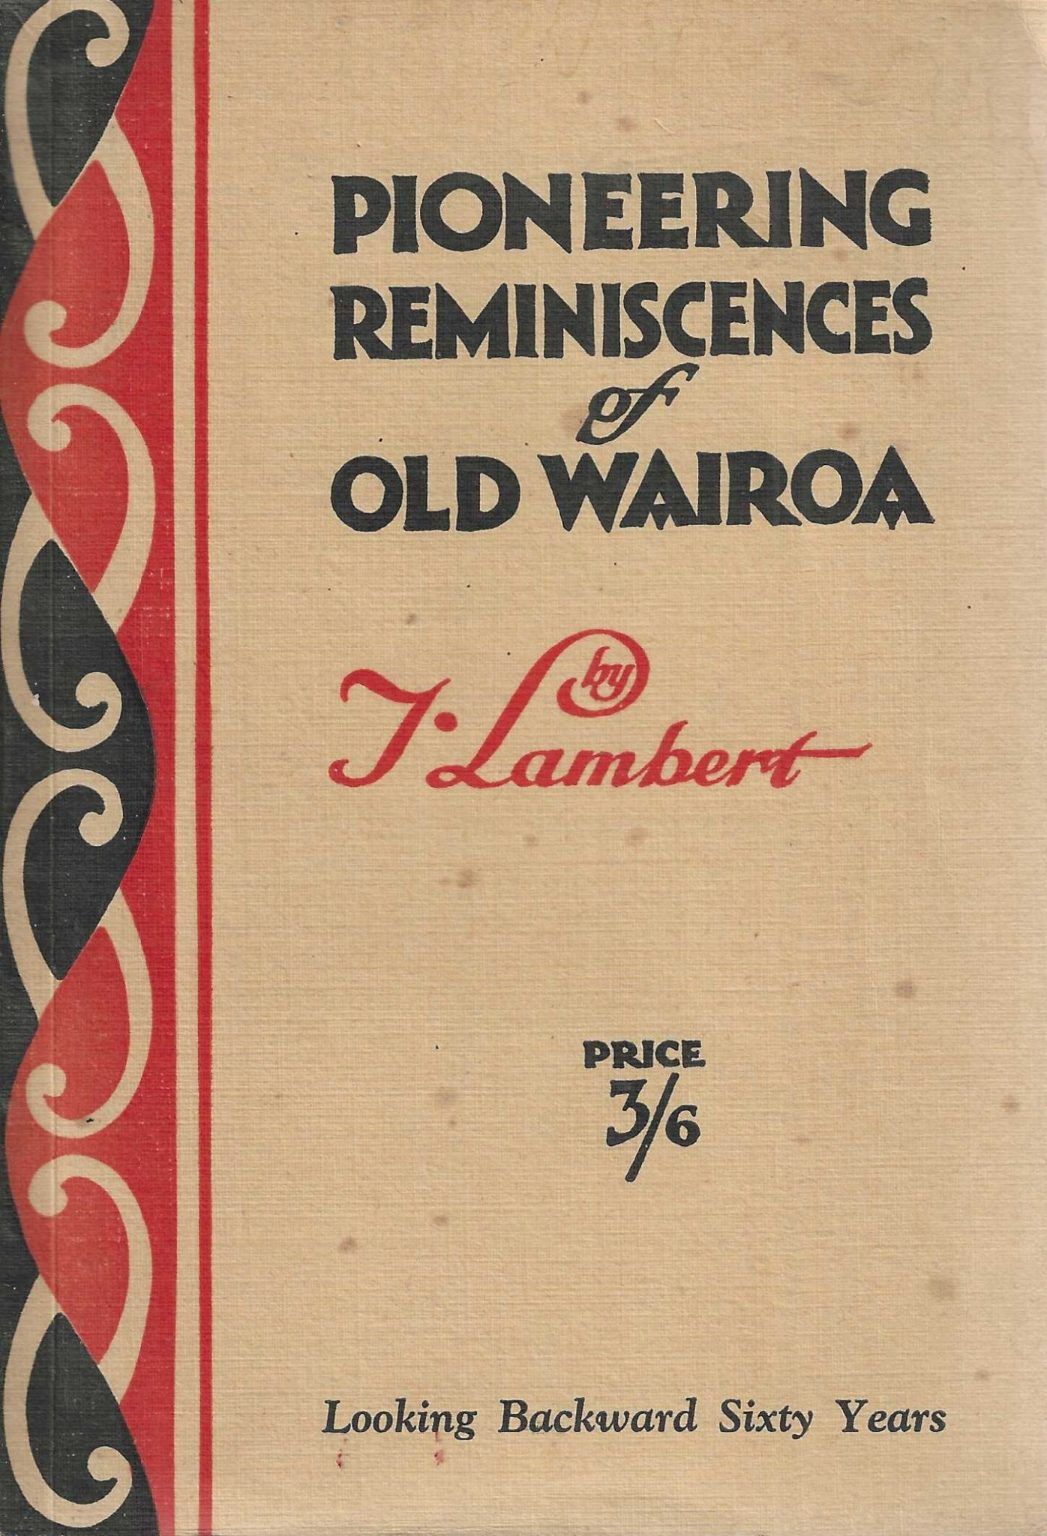 PIONEERING REMINISCENCES OF OLD WAIROA